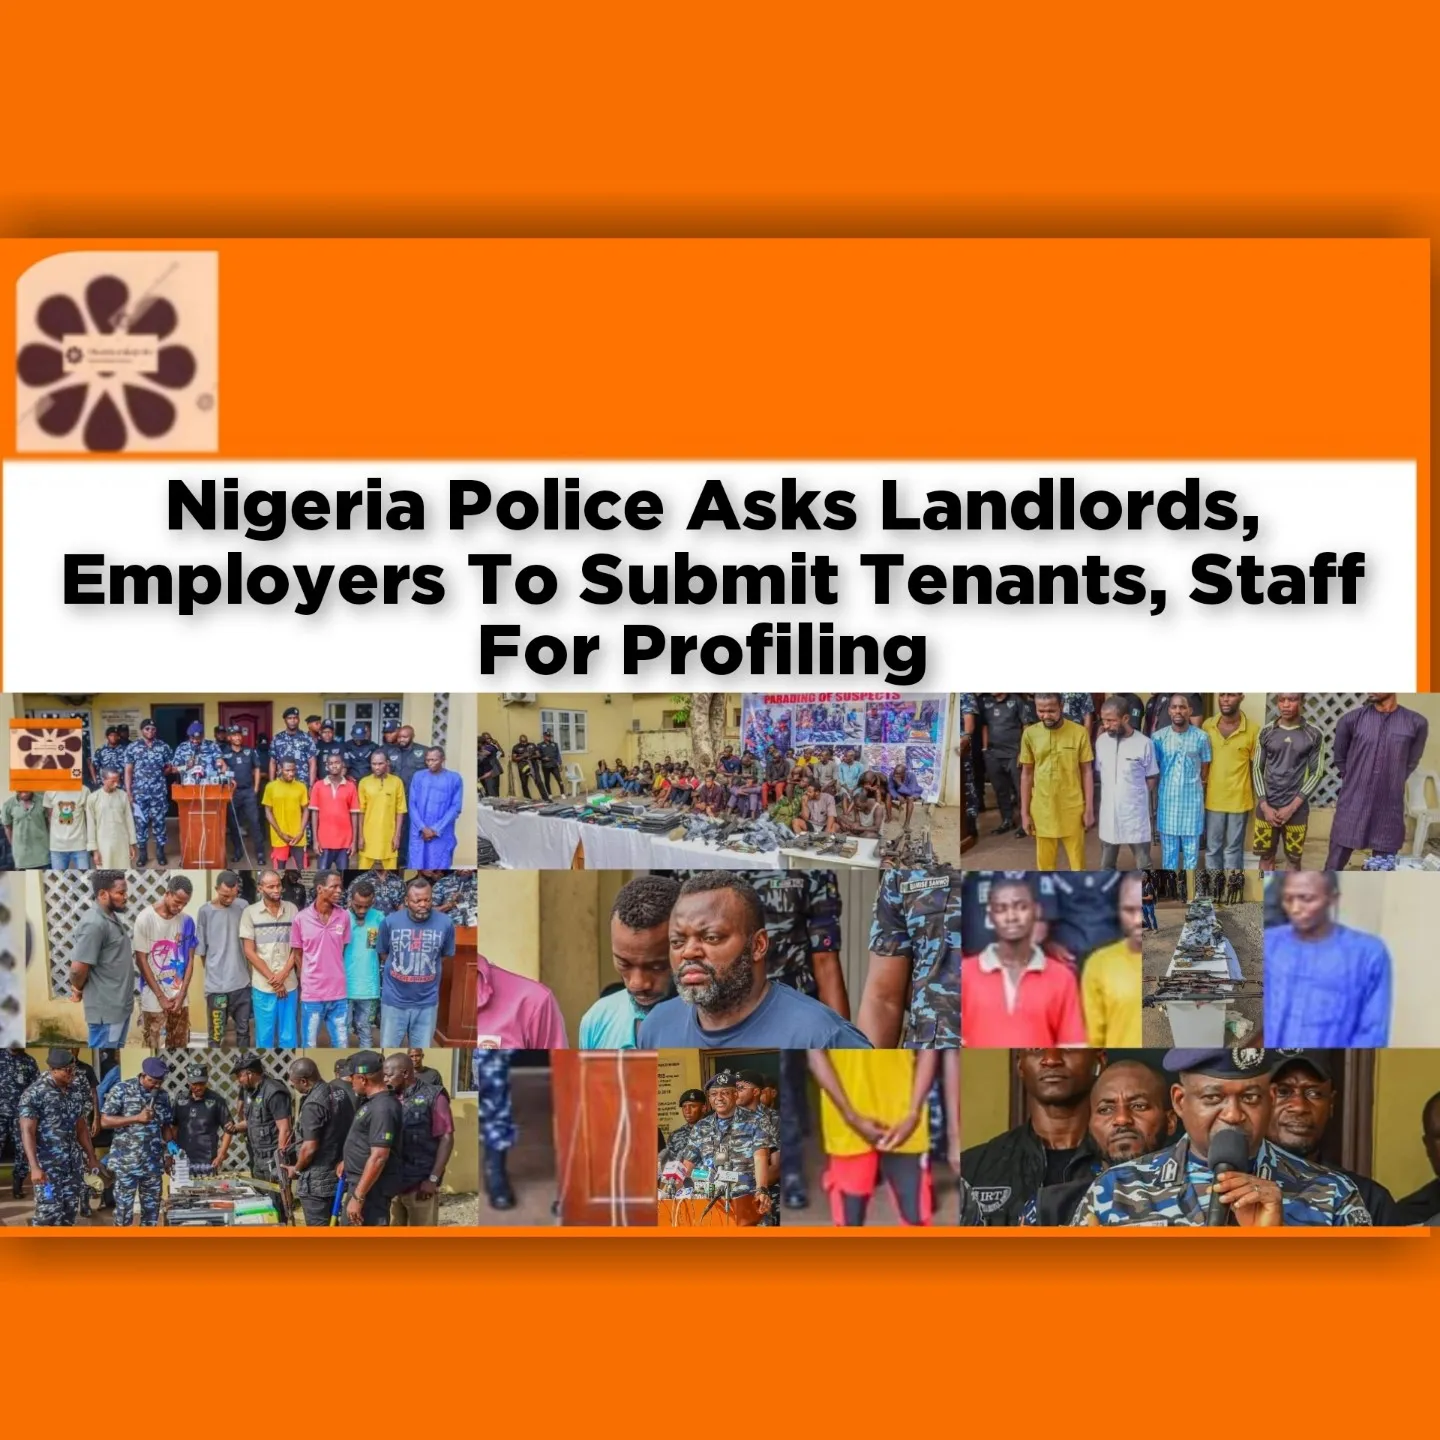 Nigeria Police Asks Landlords, Employers To Submit Tenants, Staff For Profiling